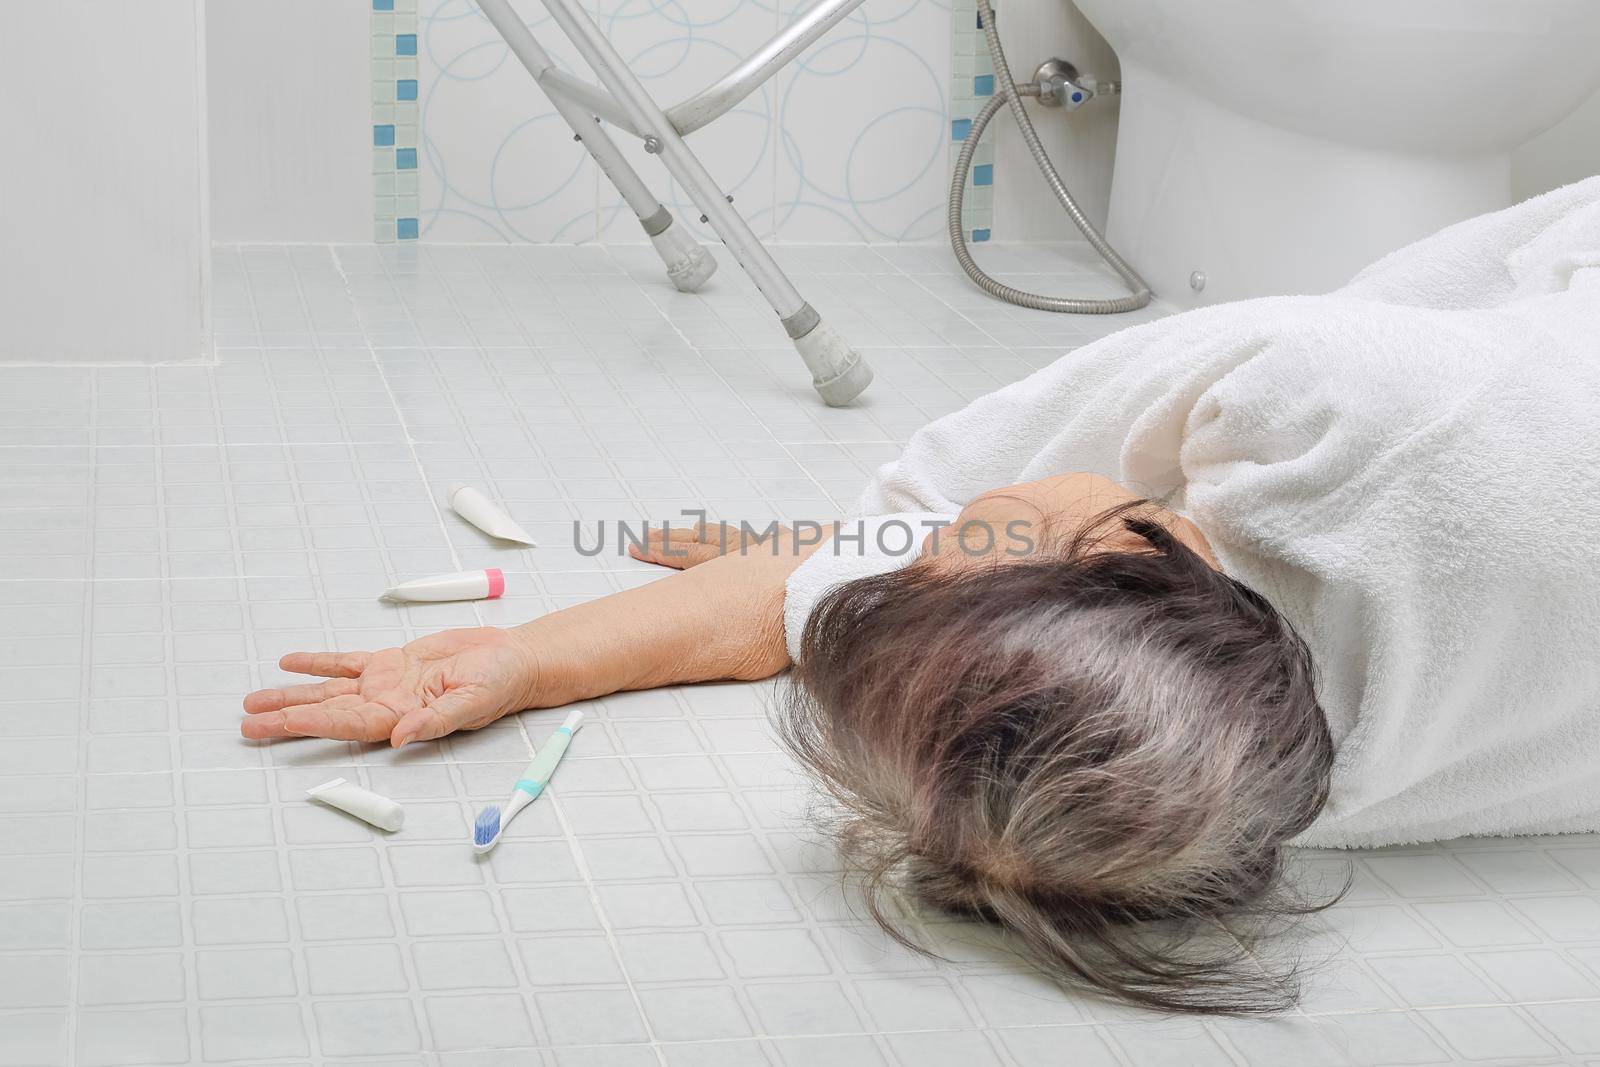 Elderly woman falling in bathroom because slippery surfaces by toa55